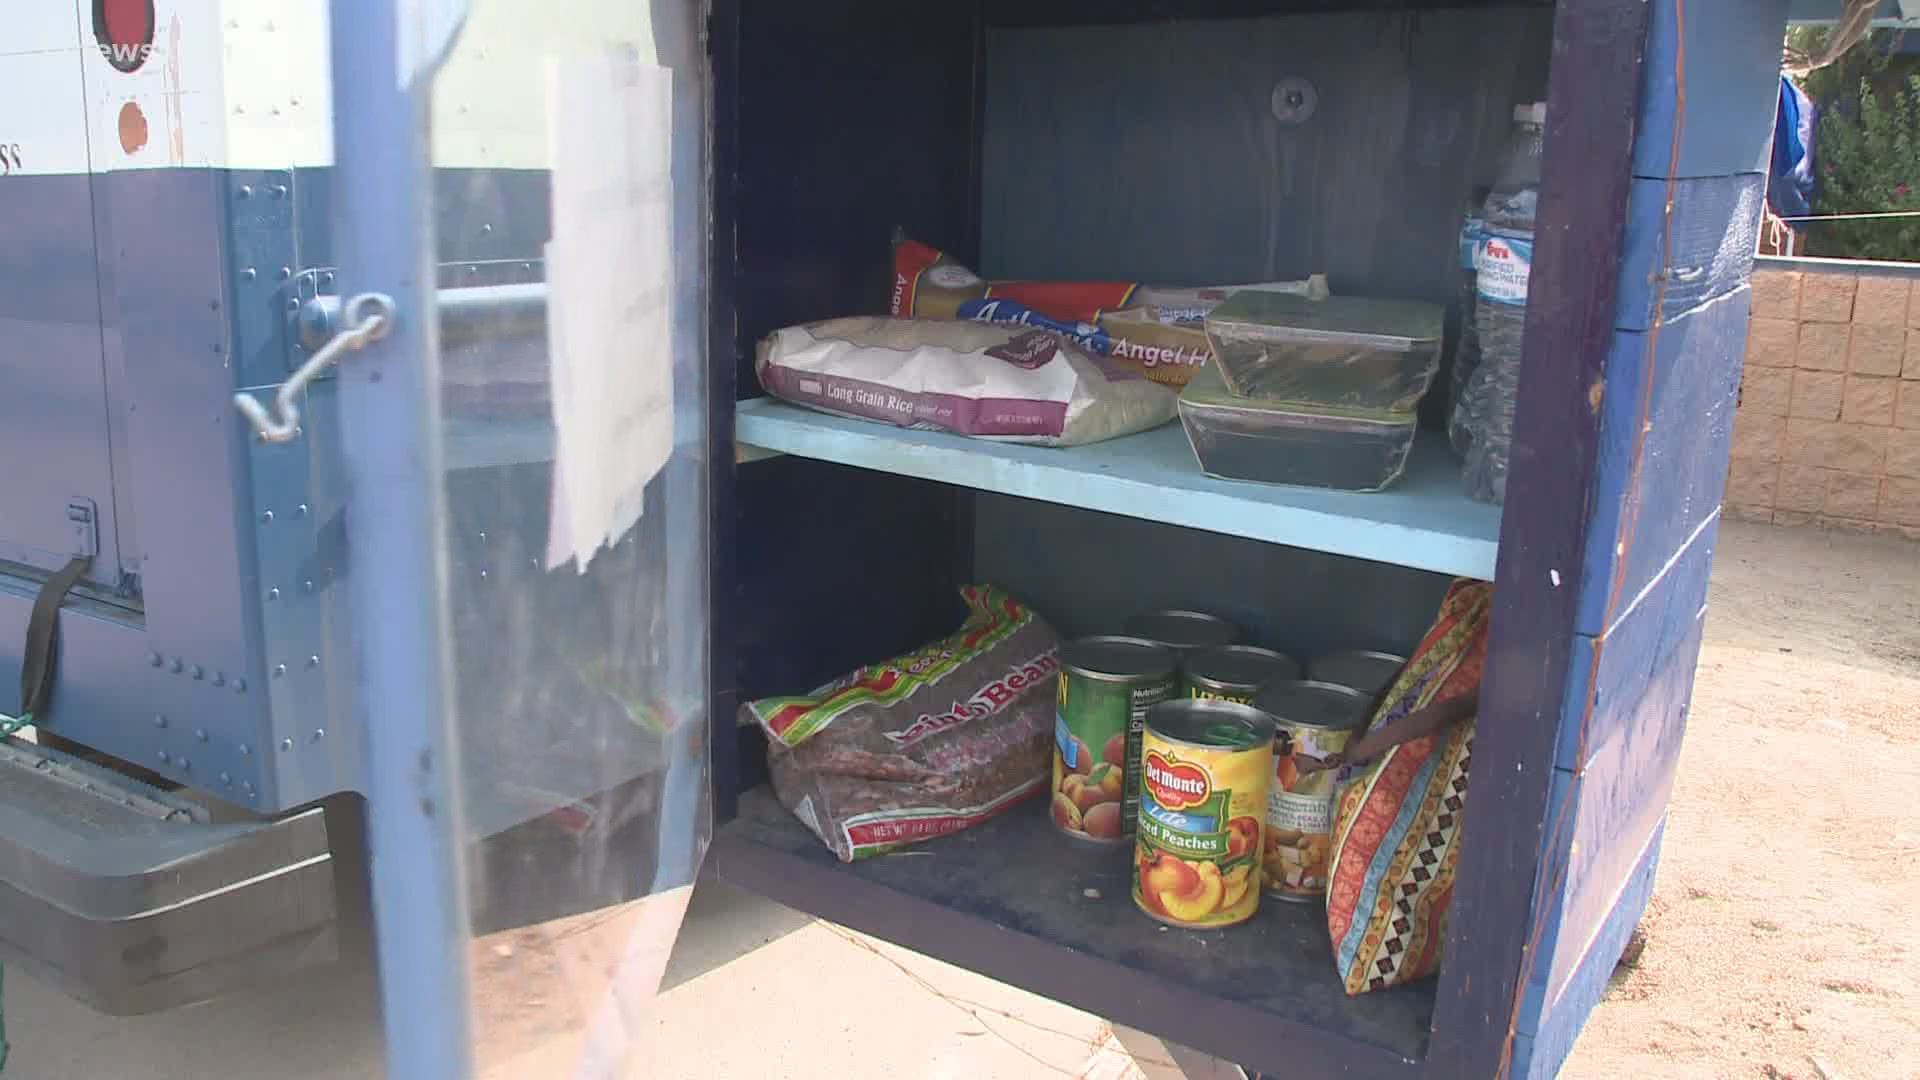 The demand for essentials like food and toilet paper due to COVID-19 has kicked an honor-system food pantry movement into high gear for whoever may need it.